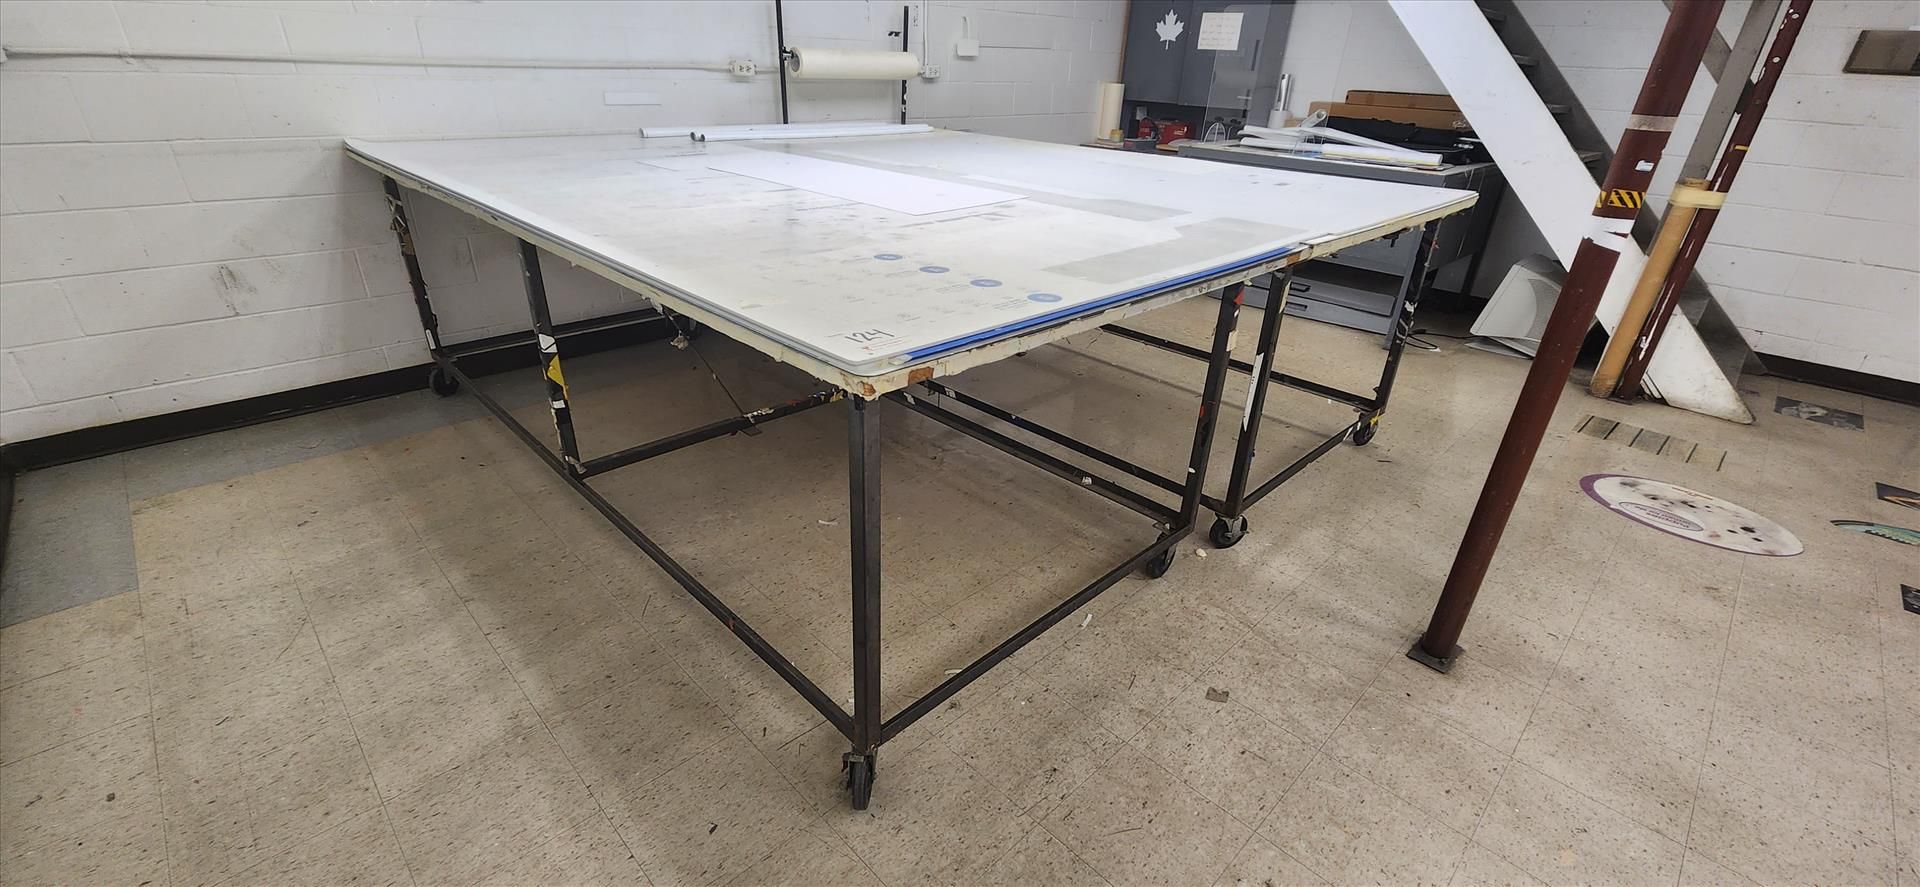 trim table w/ metal frame and casters, approx. 54 in. x 121 in. (excluding contents)